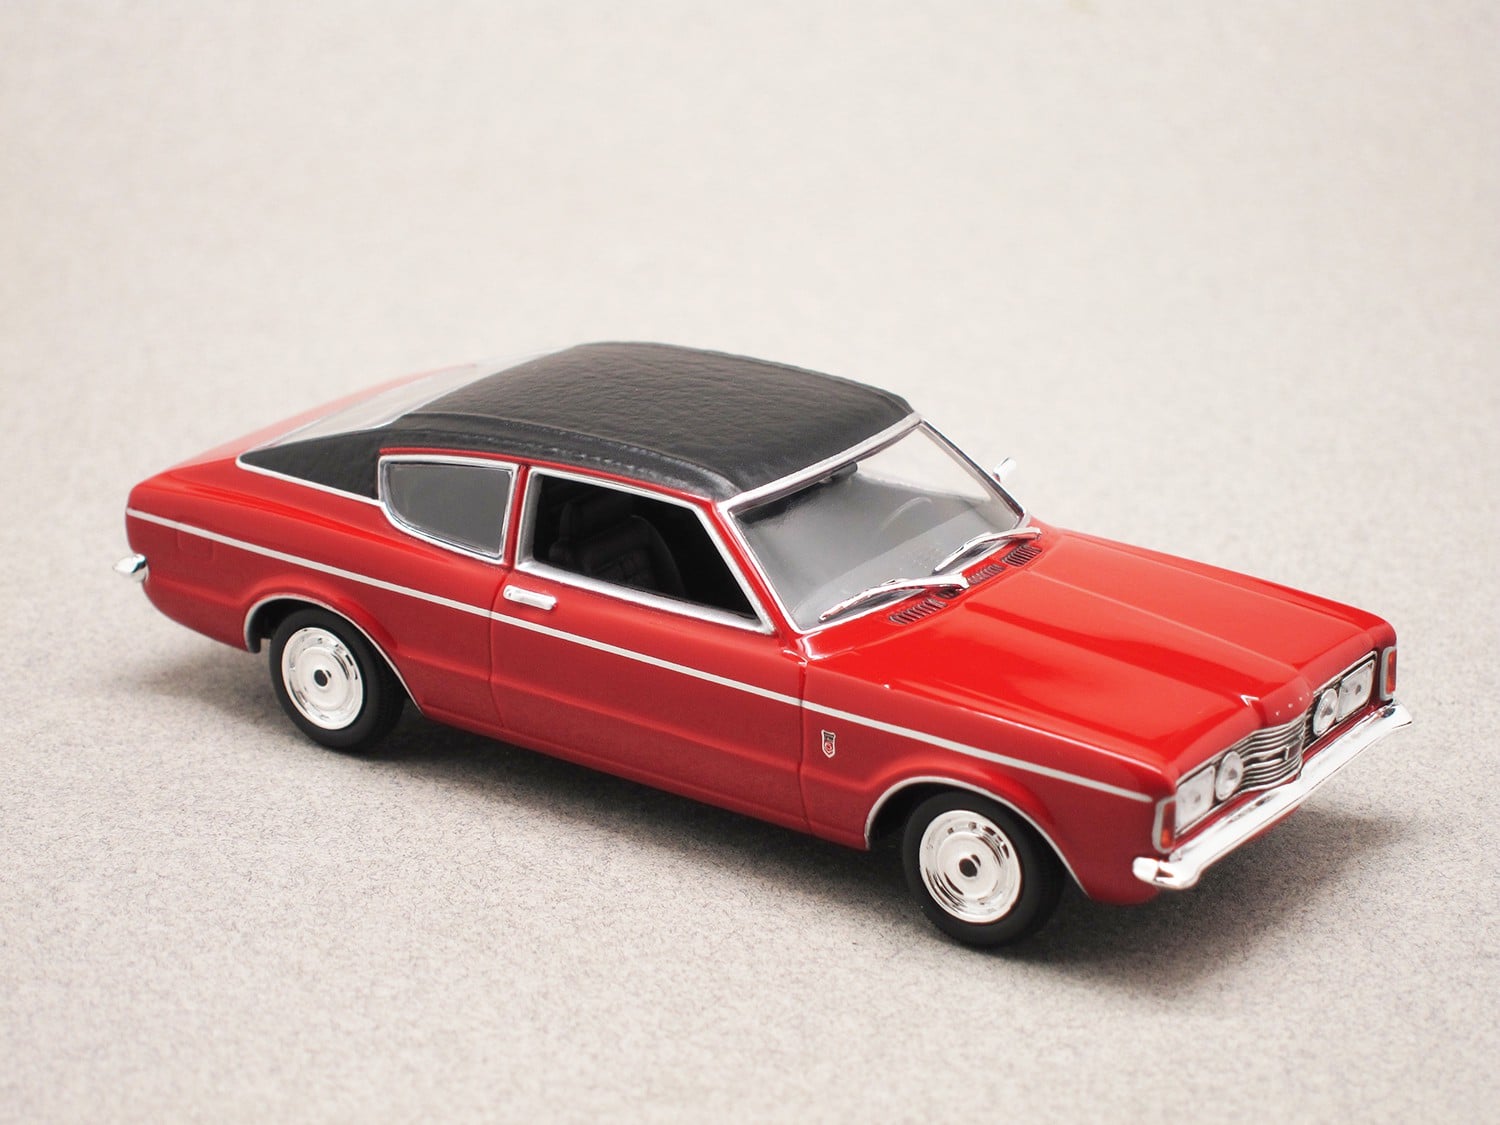 Ford Taunus coupe 1970 (Maxichamps) 1:43